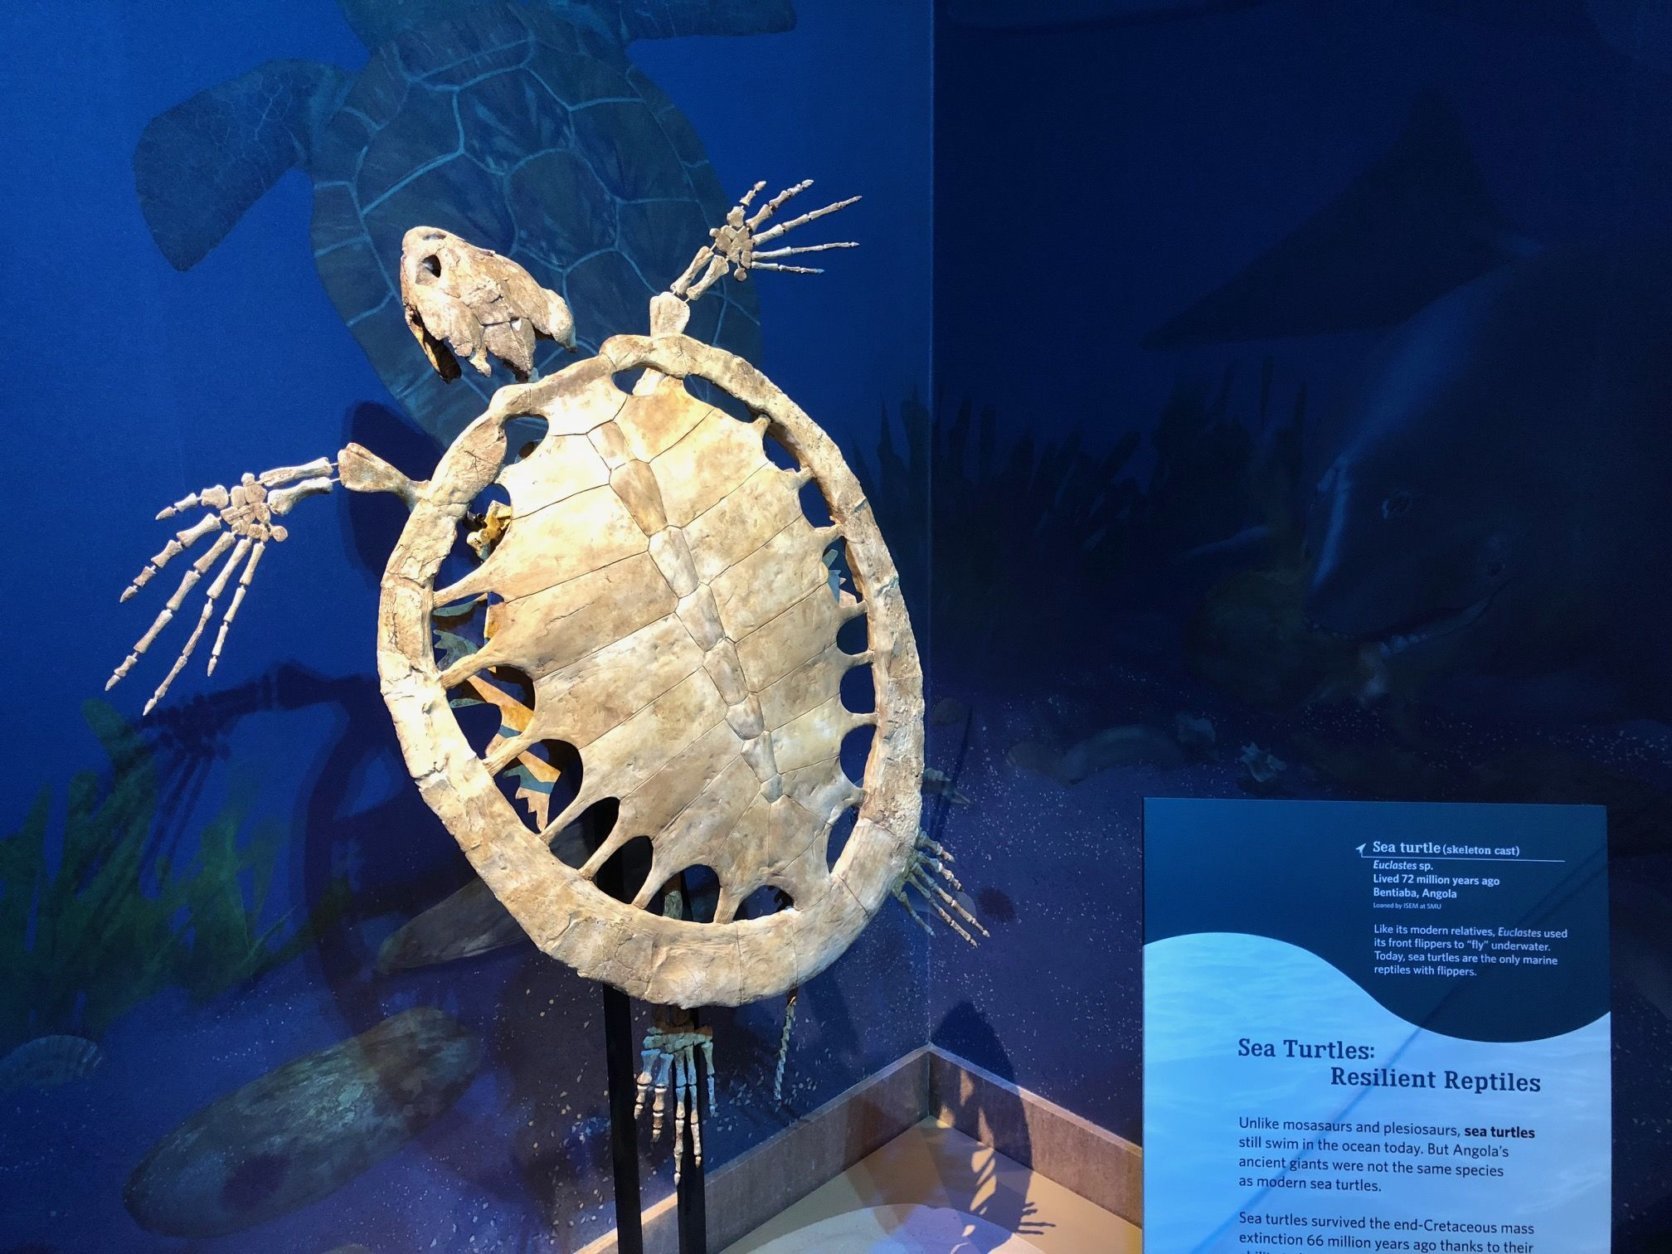 This is a new species of a turtle of the genus euclastes that was found at the locality. So newly discovered, it hasn’t been named yet. Euclastes is an extinct genus of sea turtle. (WTOP/Kristi King)